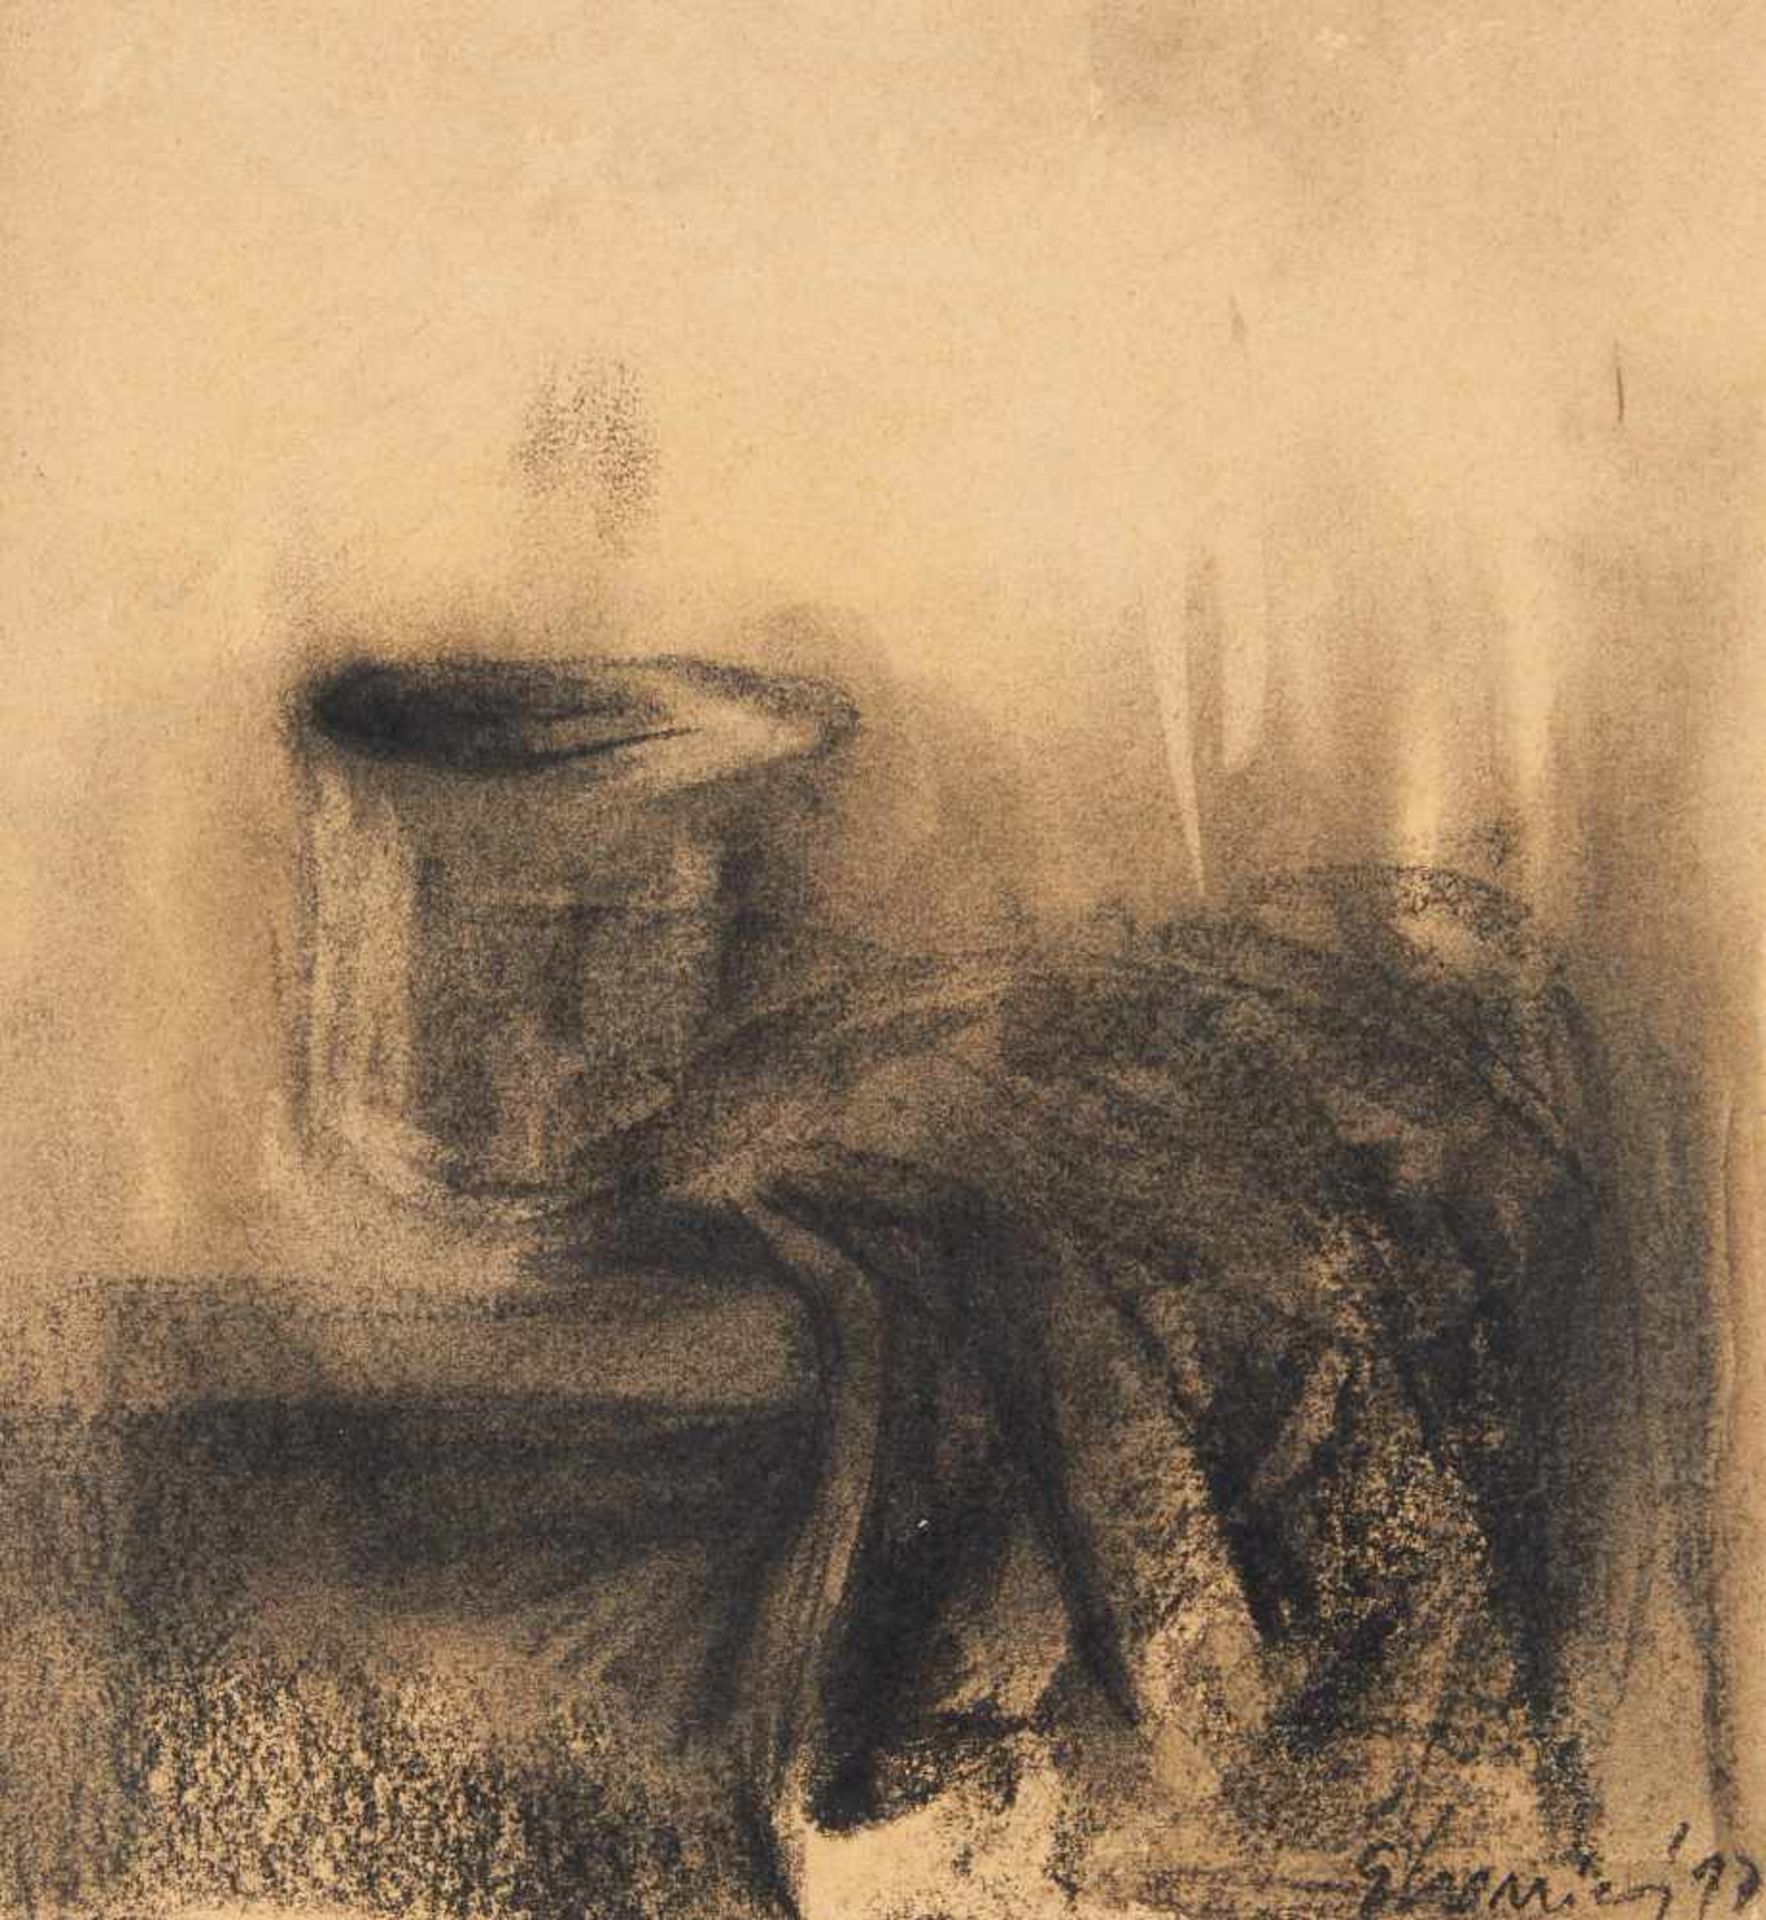 Ghenie, Adrian1977 Baia Mare/RomaniaUntitled (Pipe). 1997. Charcoal on card. 35 x 33cm. Signed and